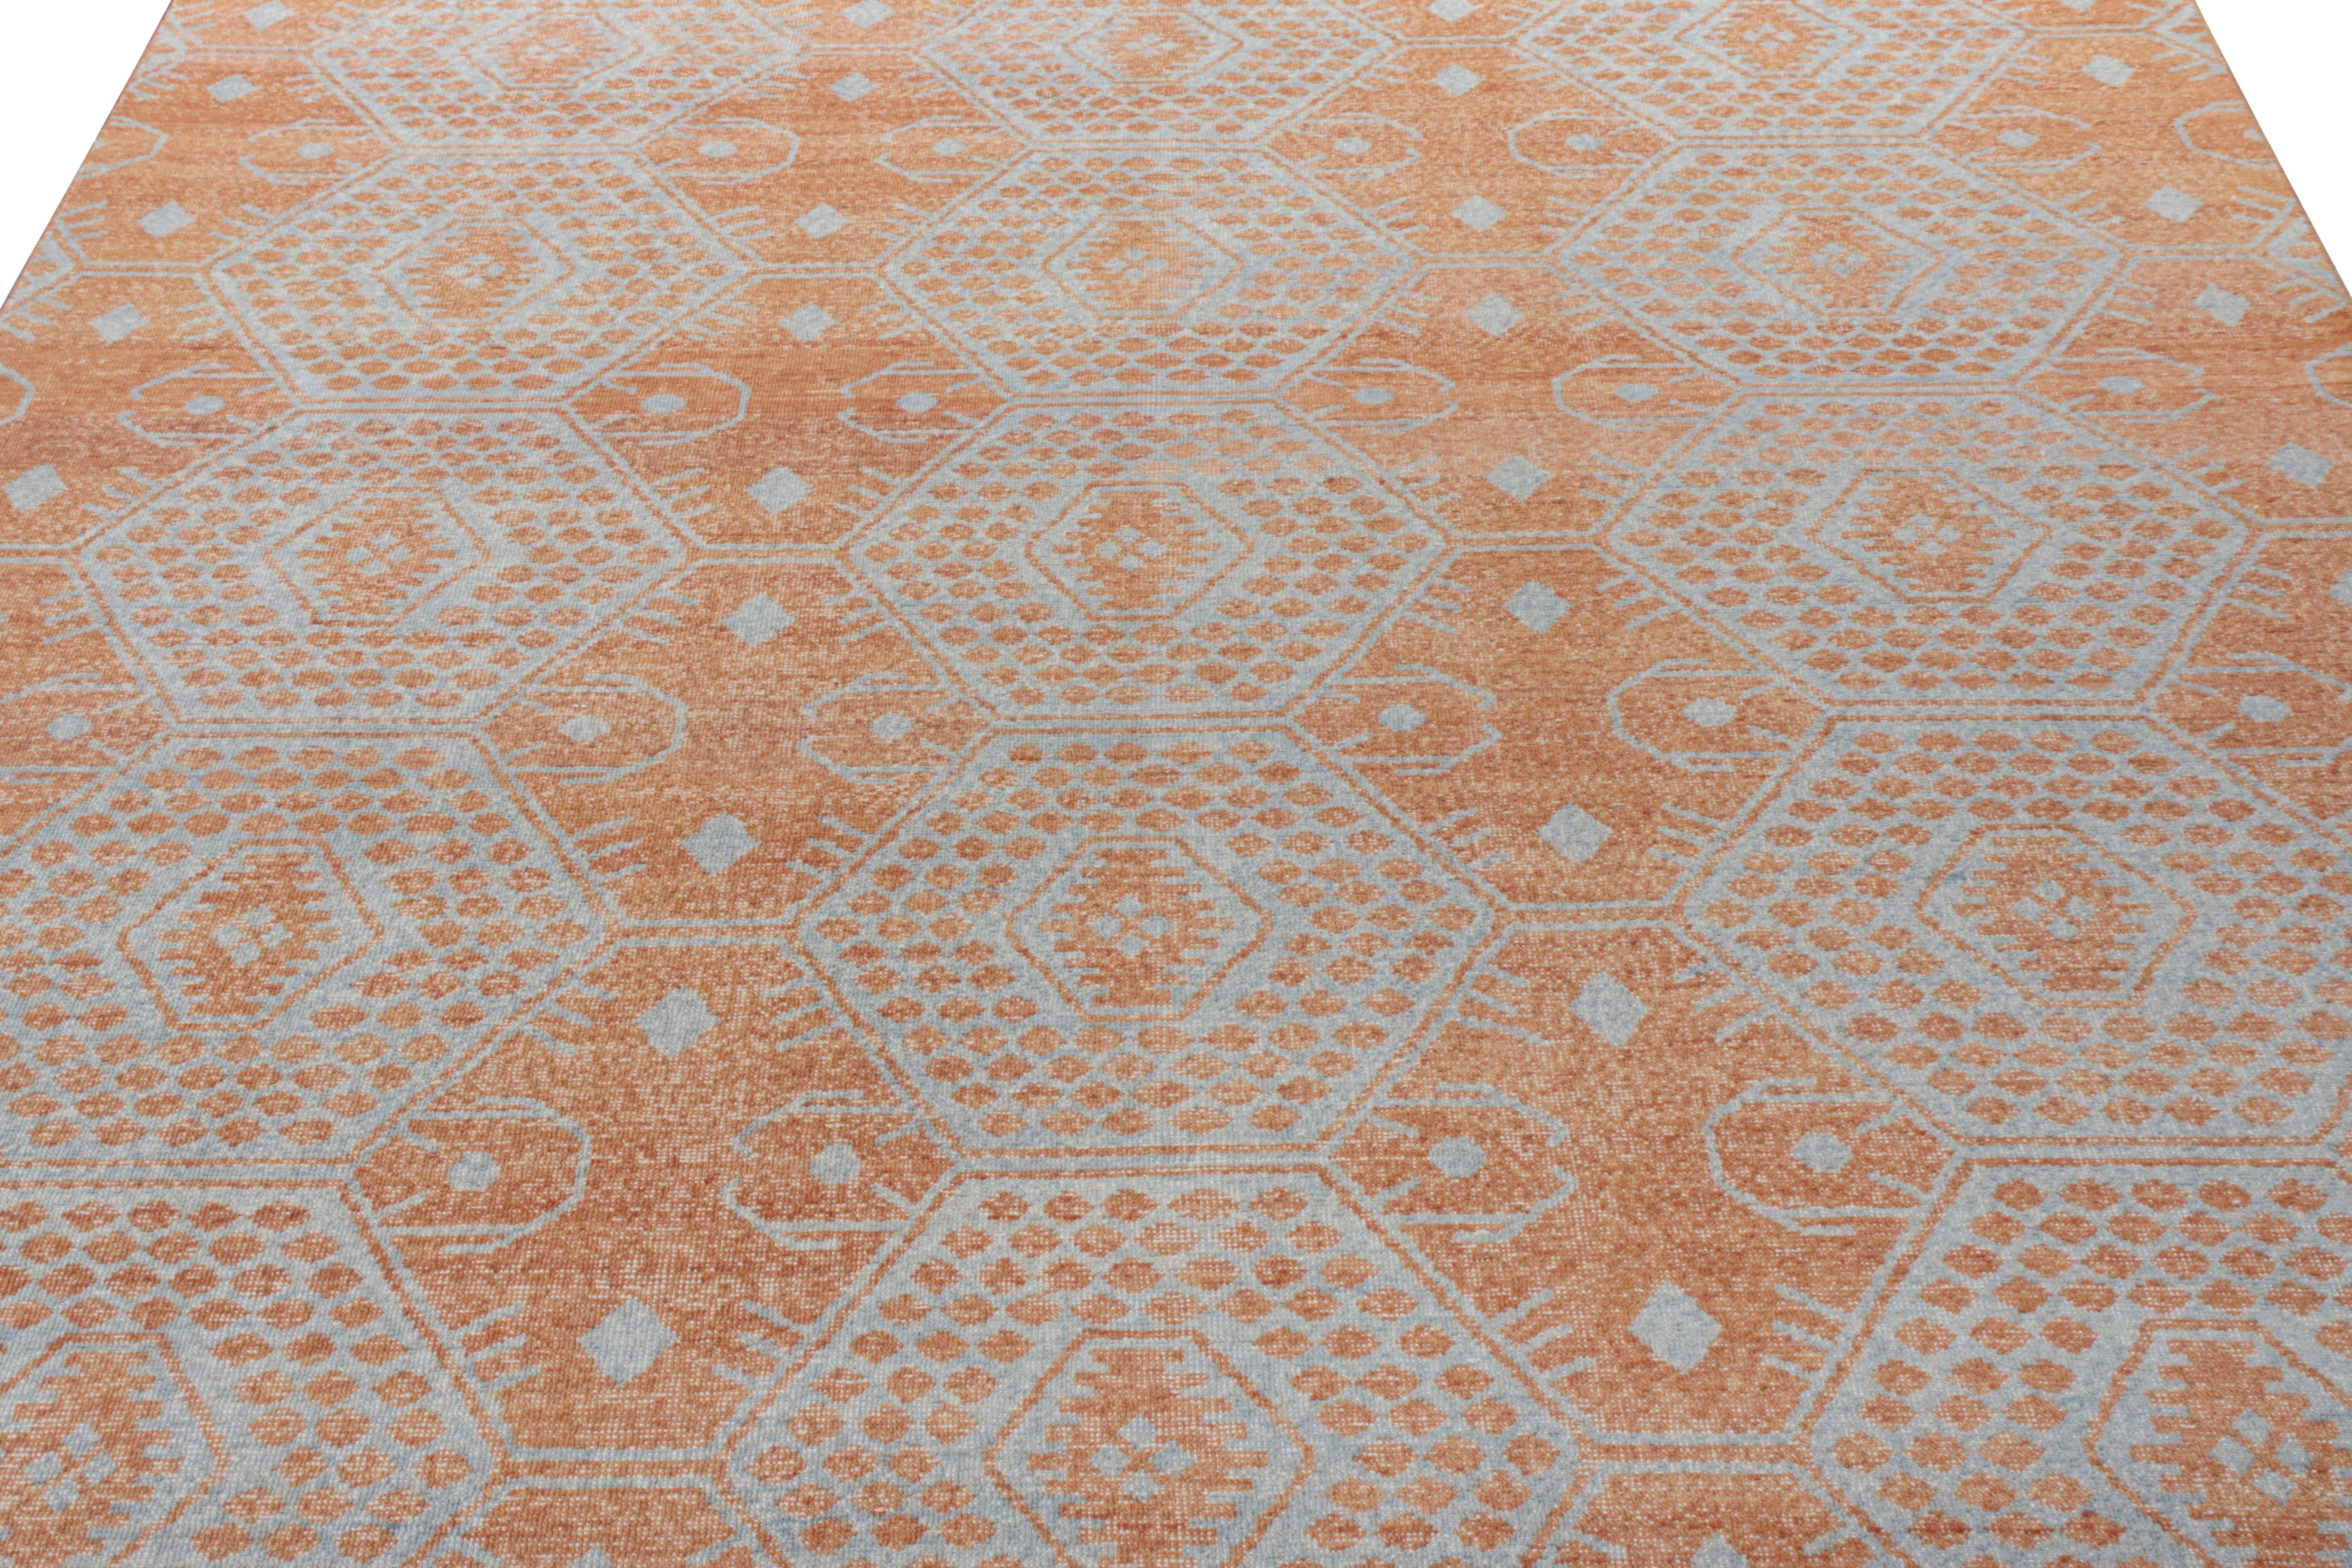 Boasting a seamless geometric pattern in an enticing orange and blue colorway, this piece from Rug & Kilim’s Homage collection succeeds in attracting the eye with its distressed textural style and balance in color. A 9x12 hand-knotted wool piece,